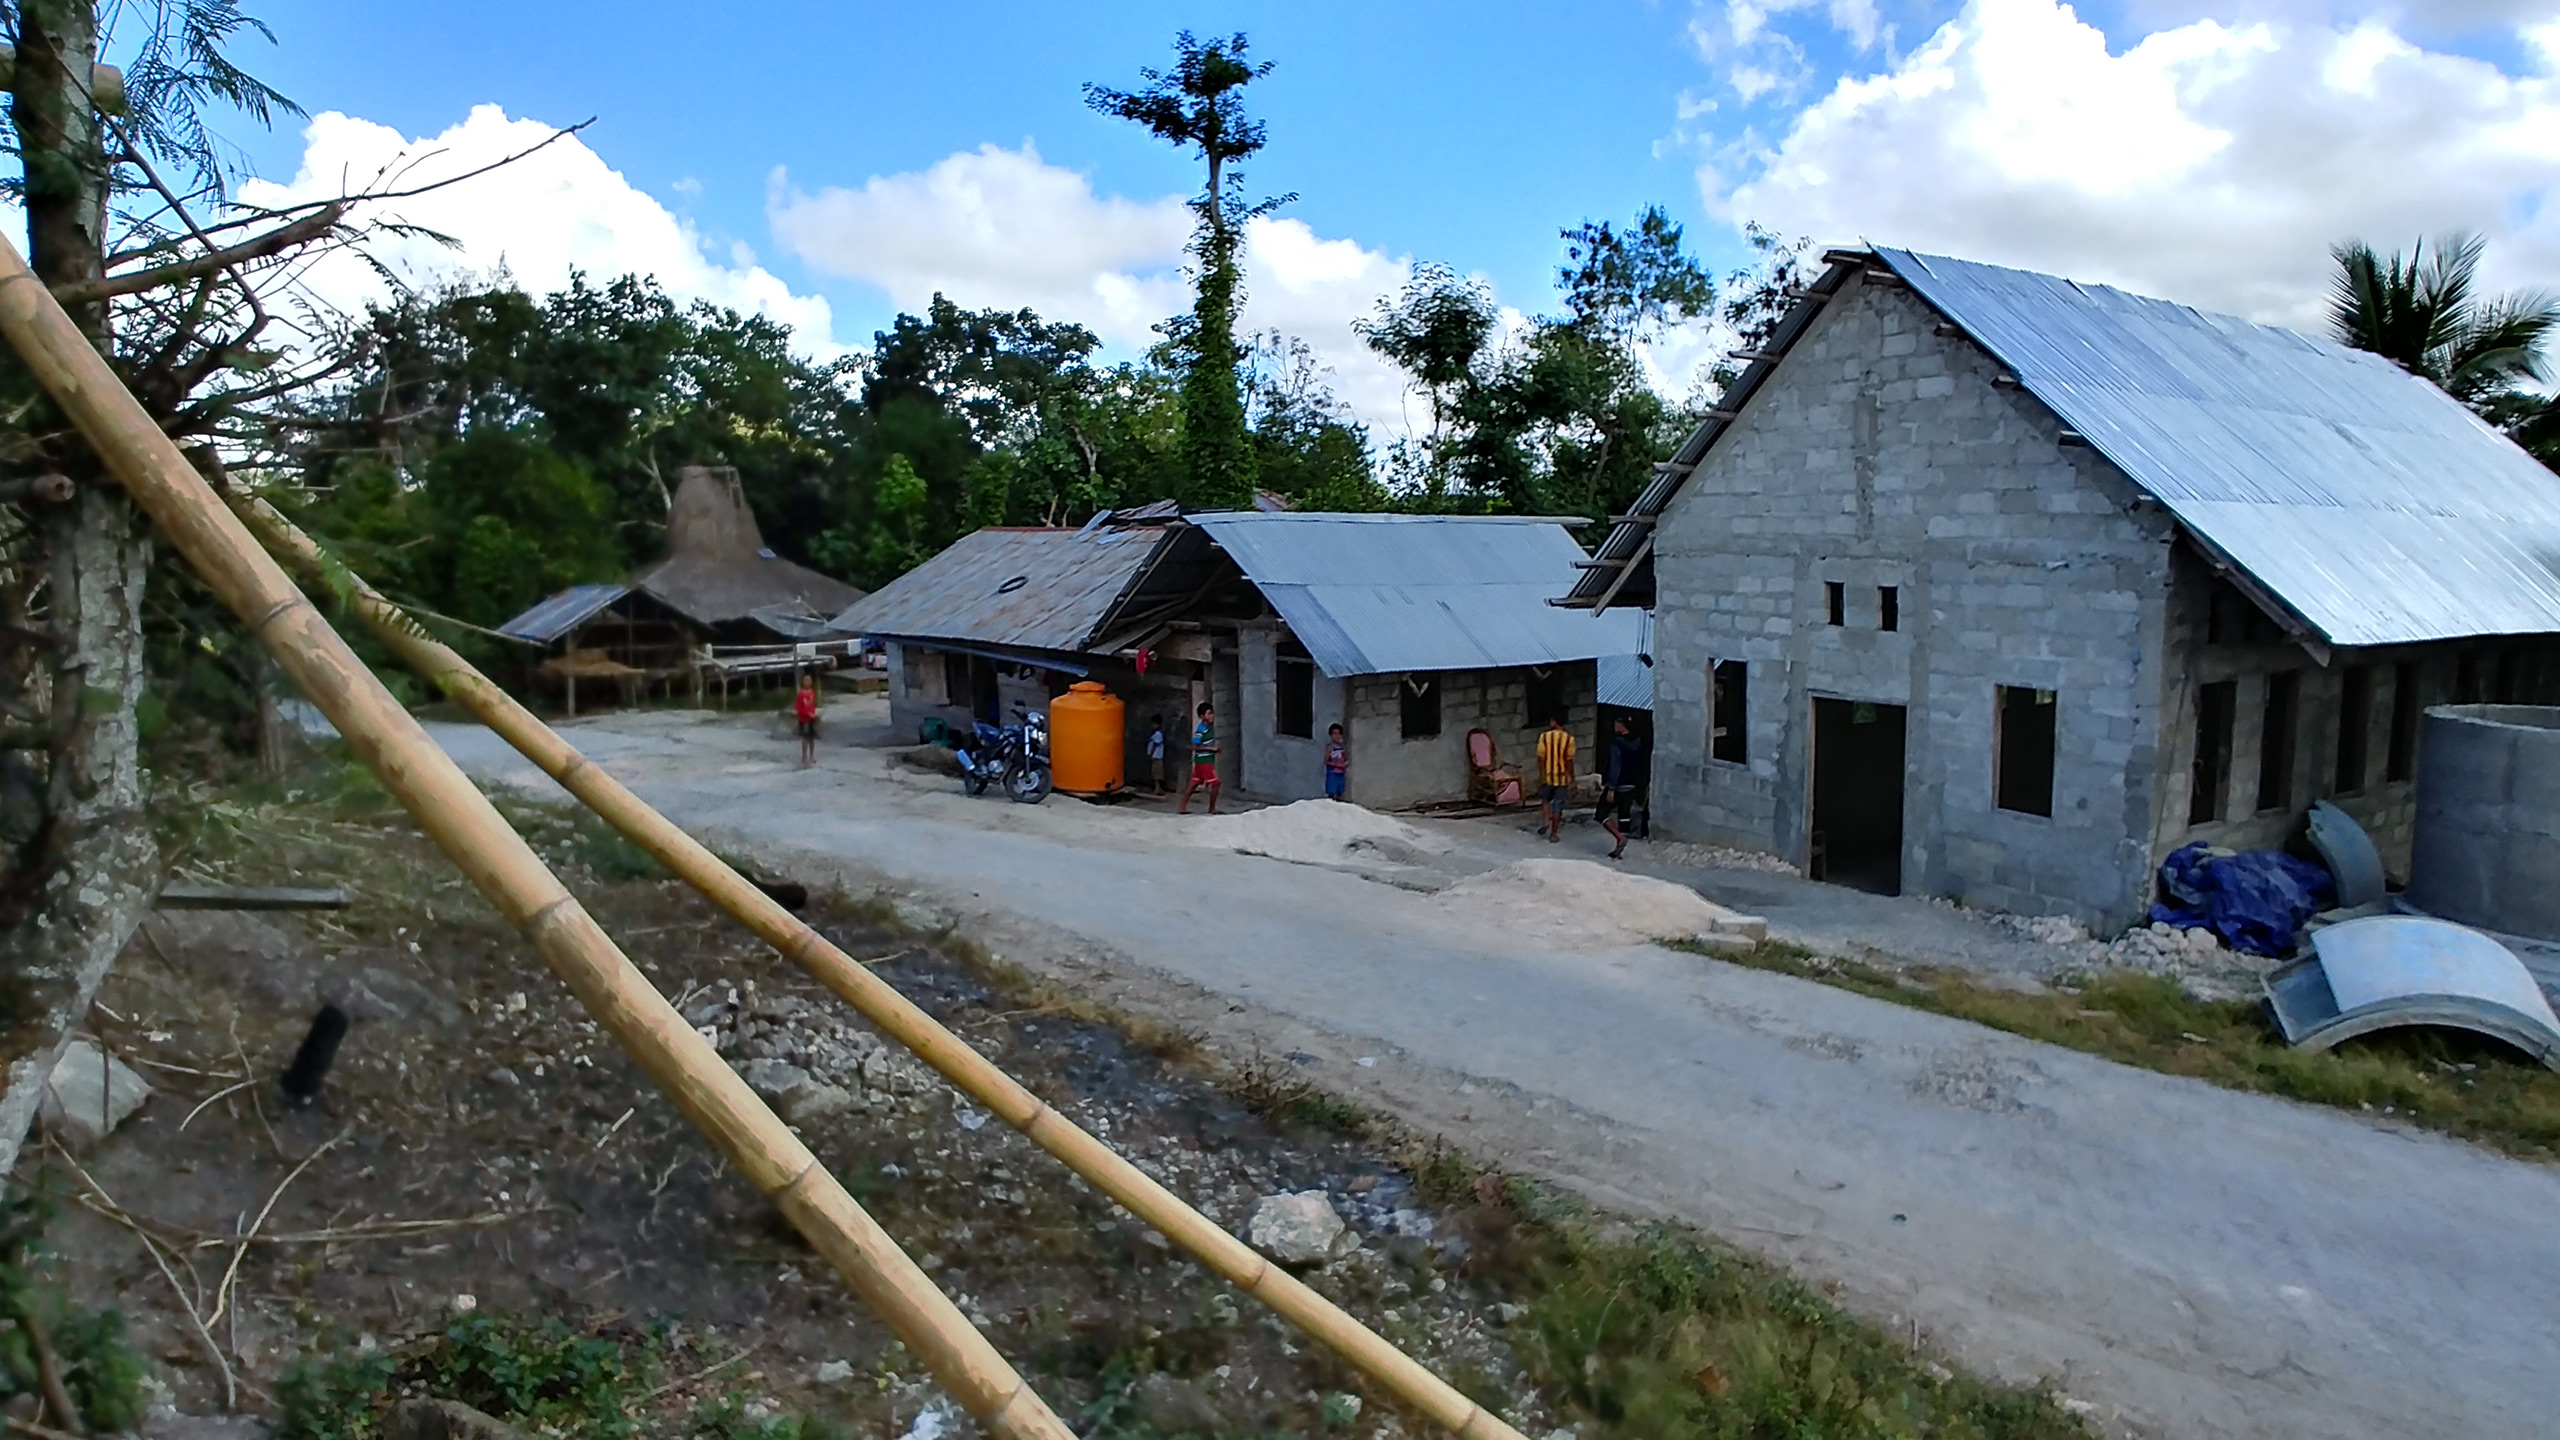 EWB NL improves water quality in Sumba Indonesia